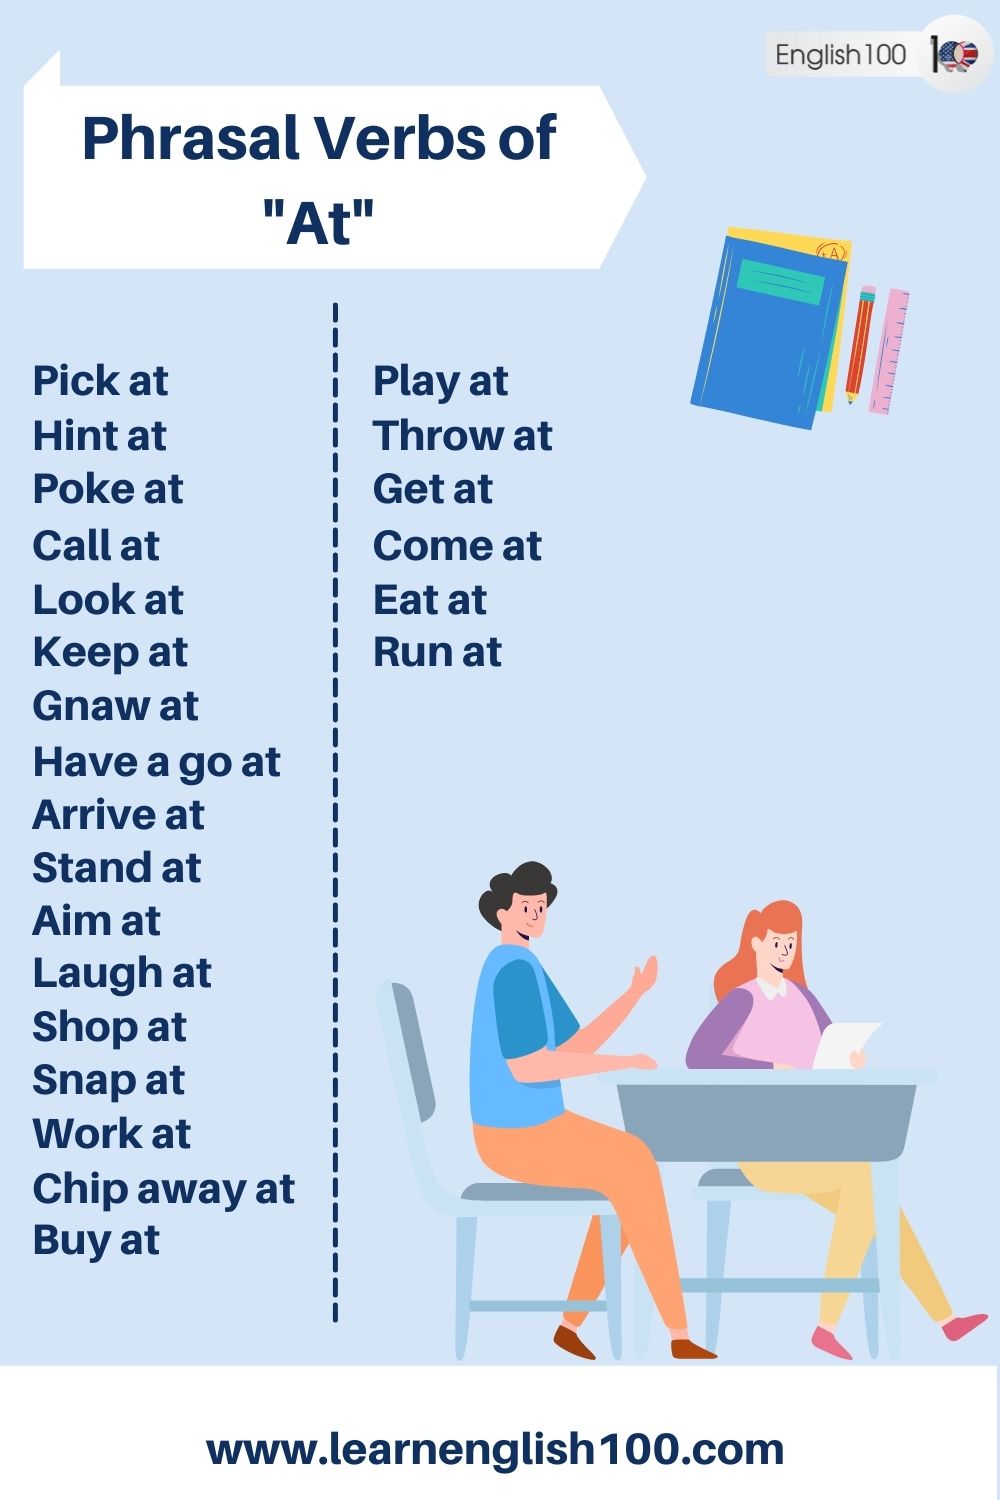 The Prepositional Phrases and Phrasal Verbs of In, On, At